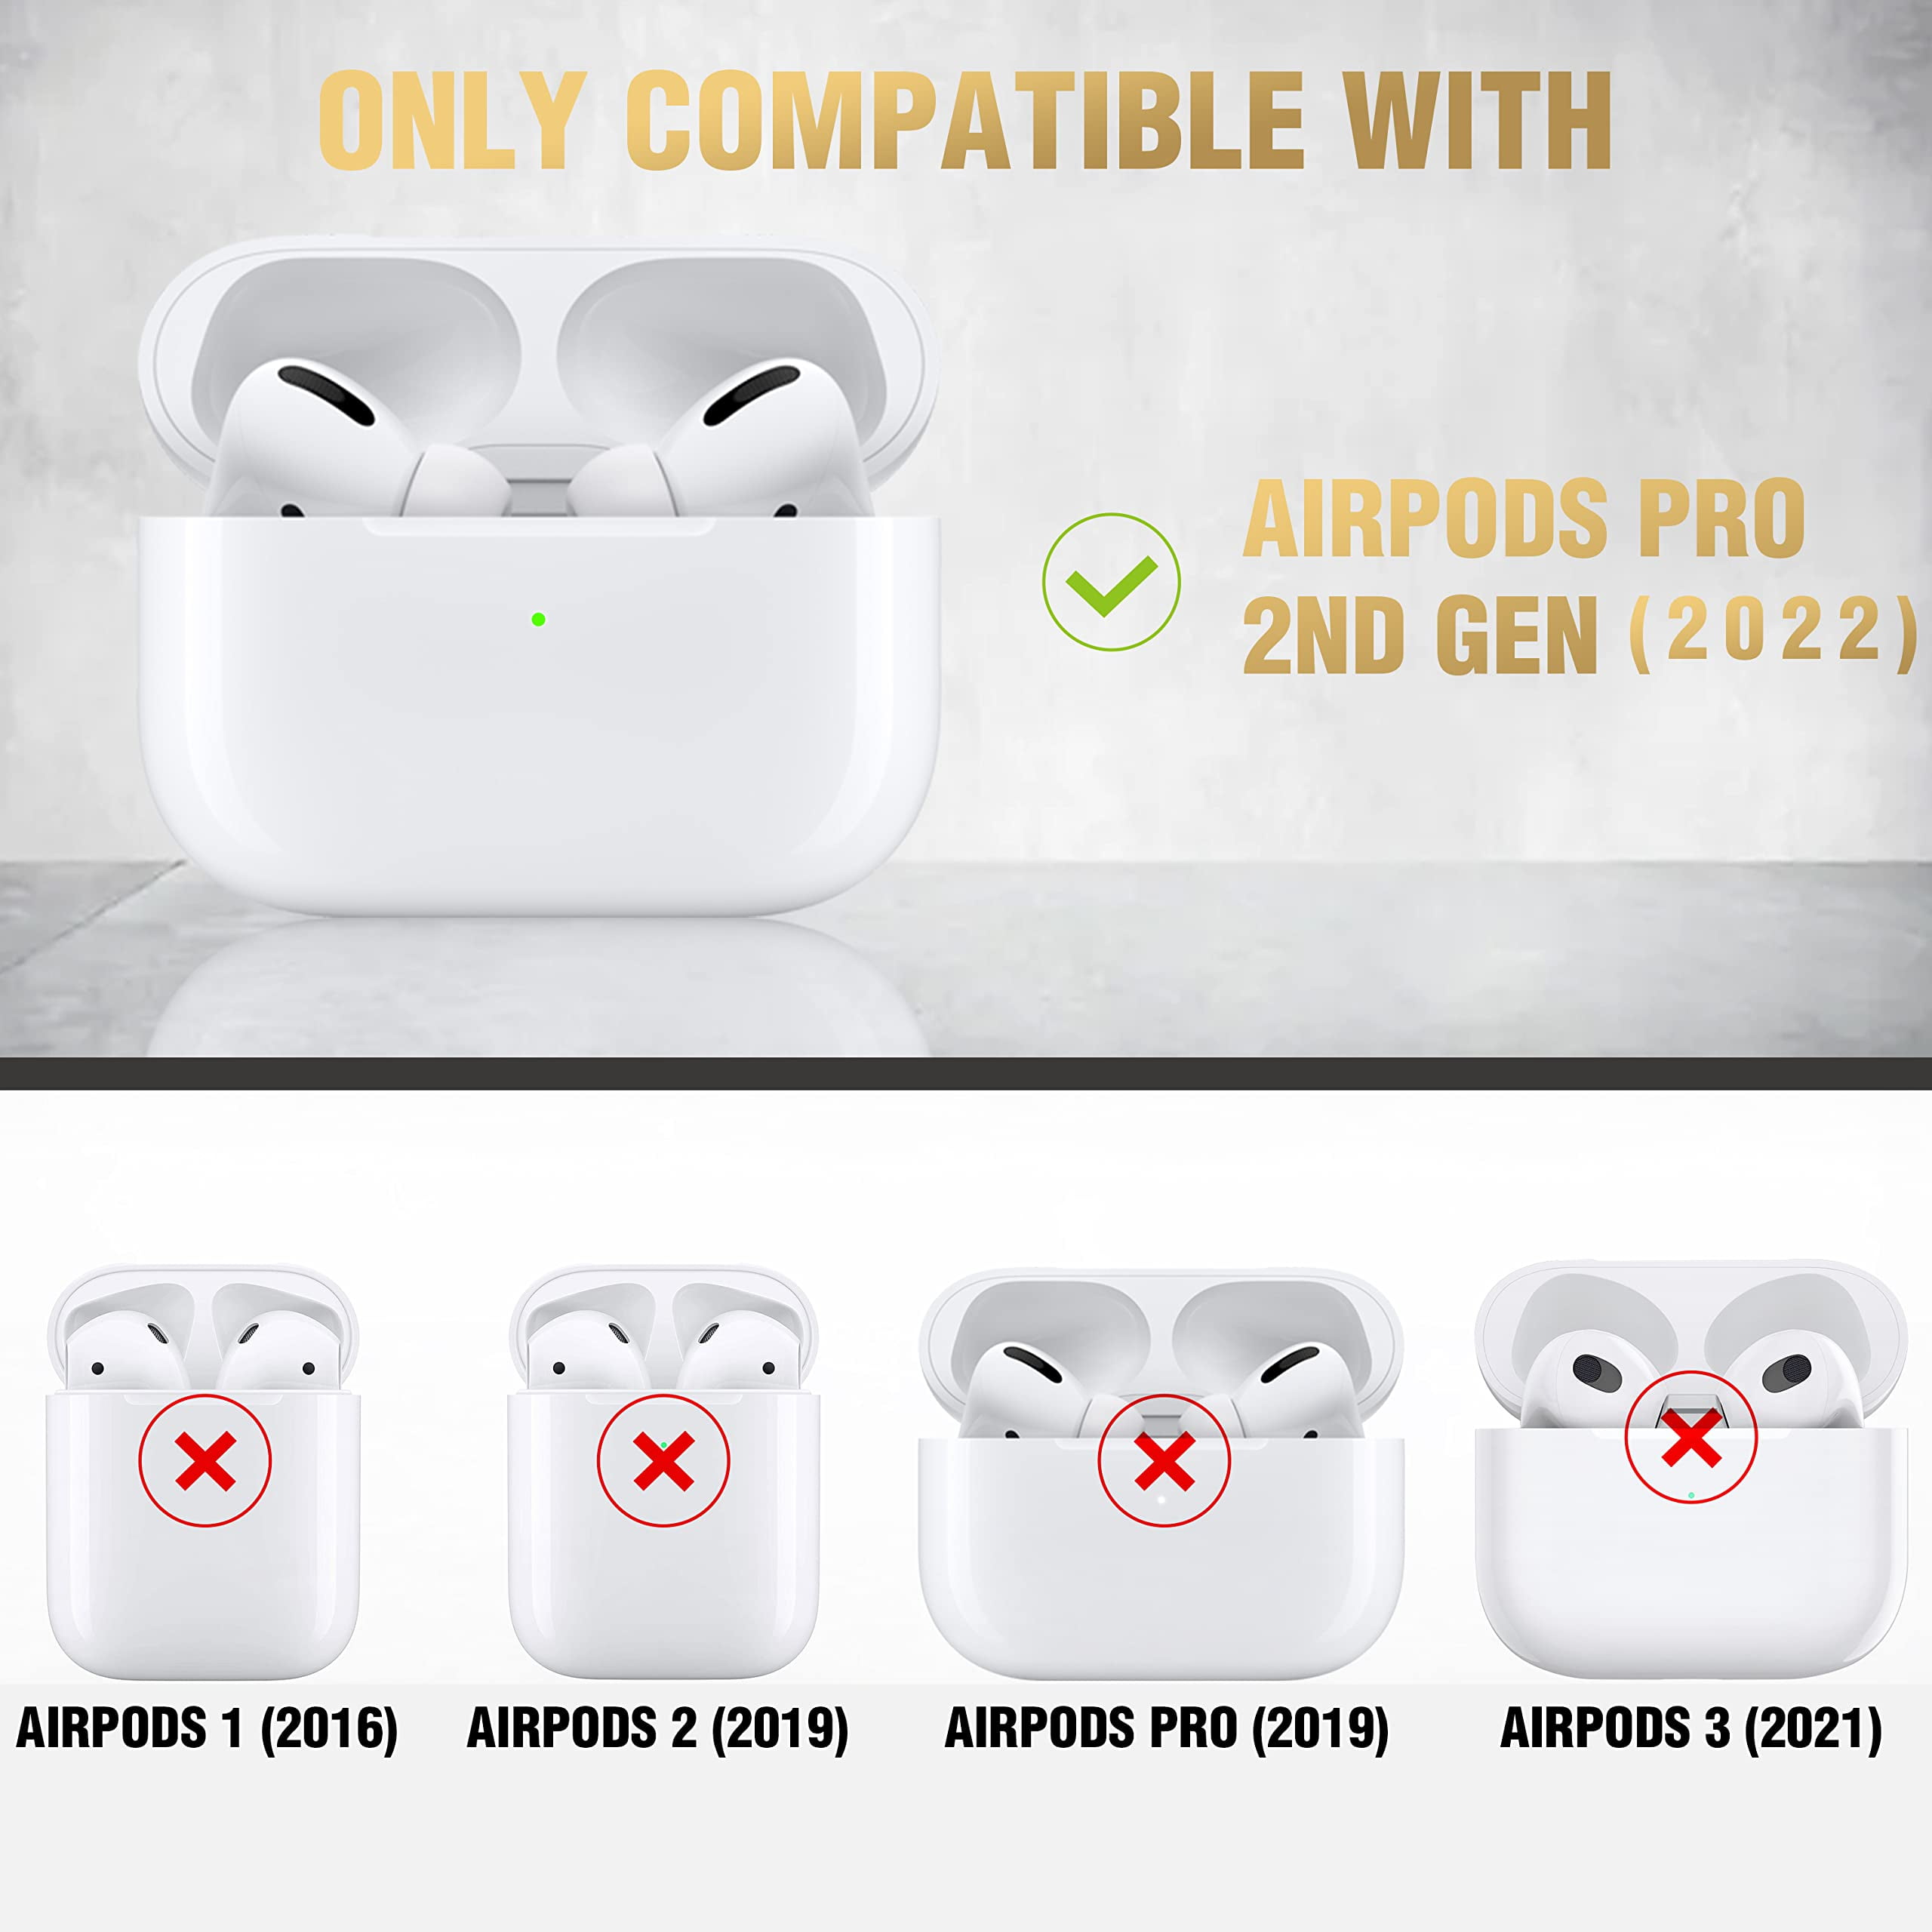 Valkit for AirPods Pro Case Cover for Men with Lock, Military Armor Series Full-Body Airpod Pro Case with Keychain Cool Air Pod Pro Shockproof